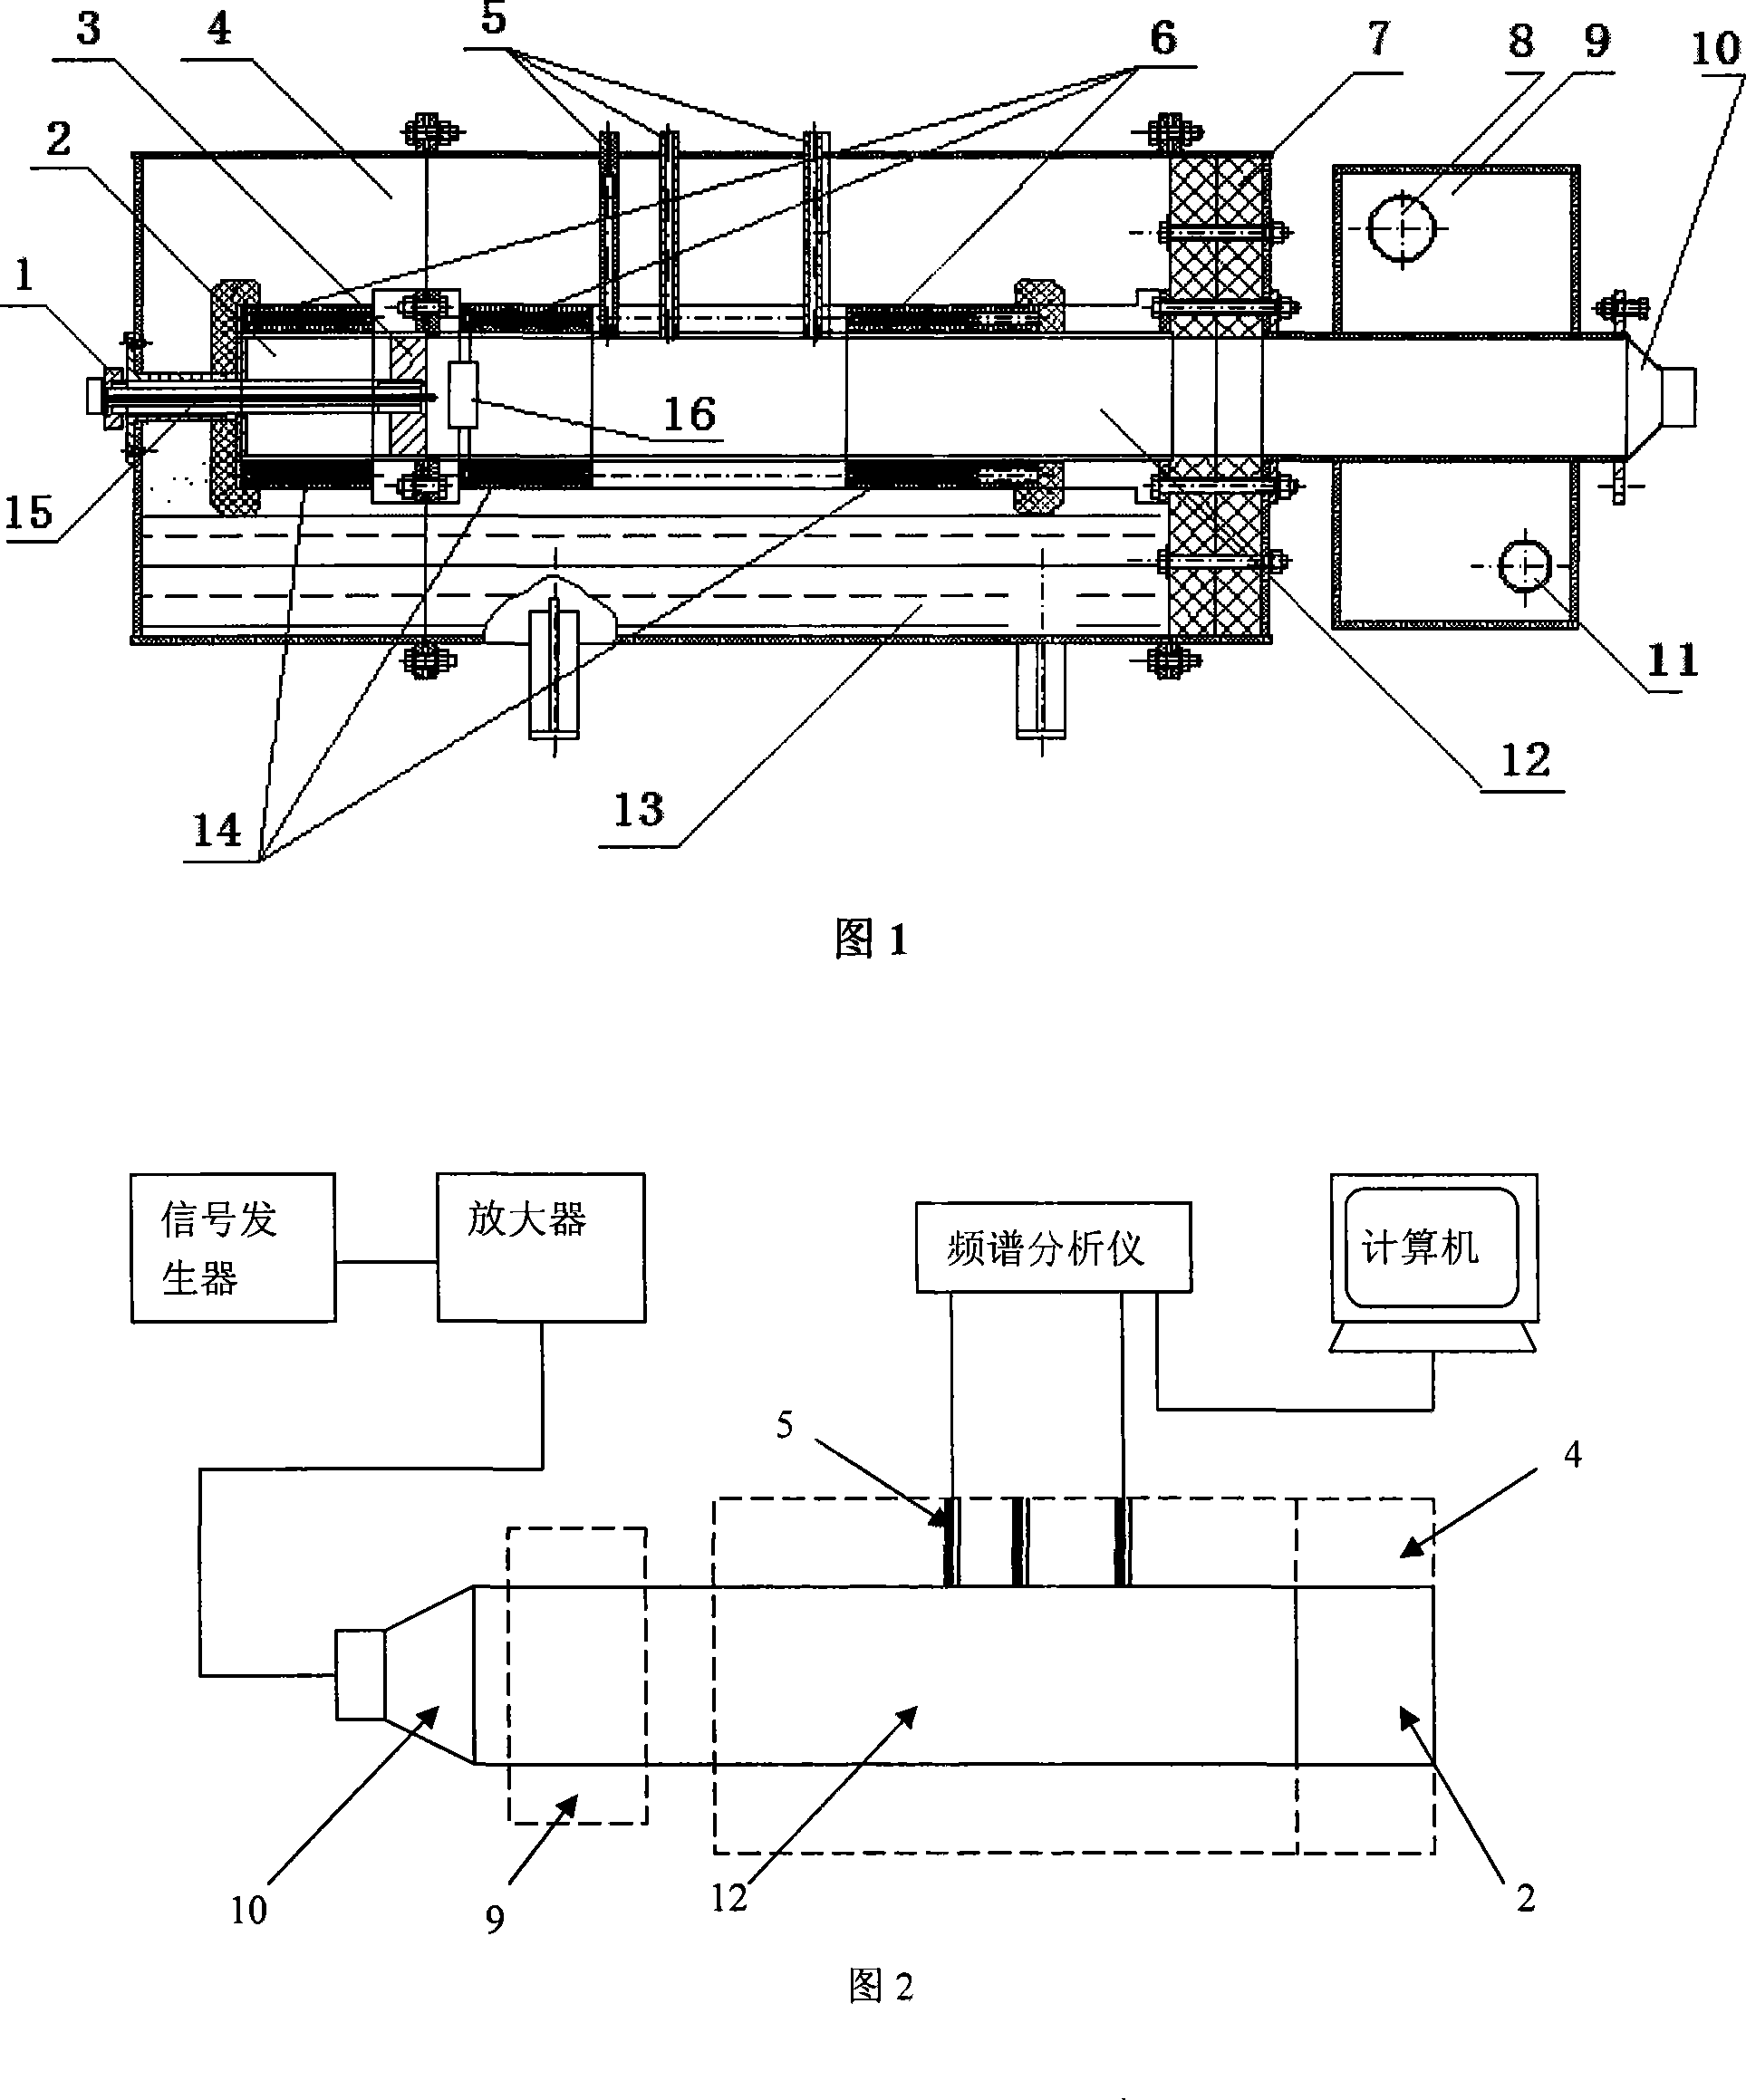 Acoustic absorbent high-temperature sound absorption performance test apparatus